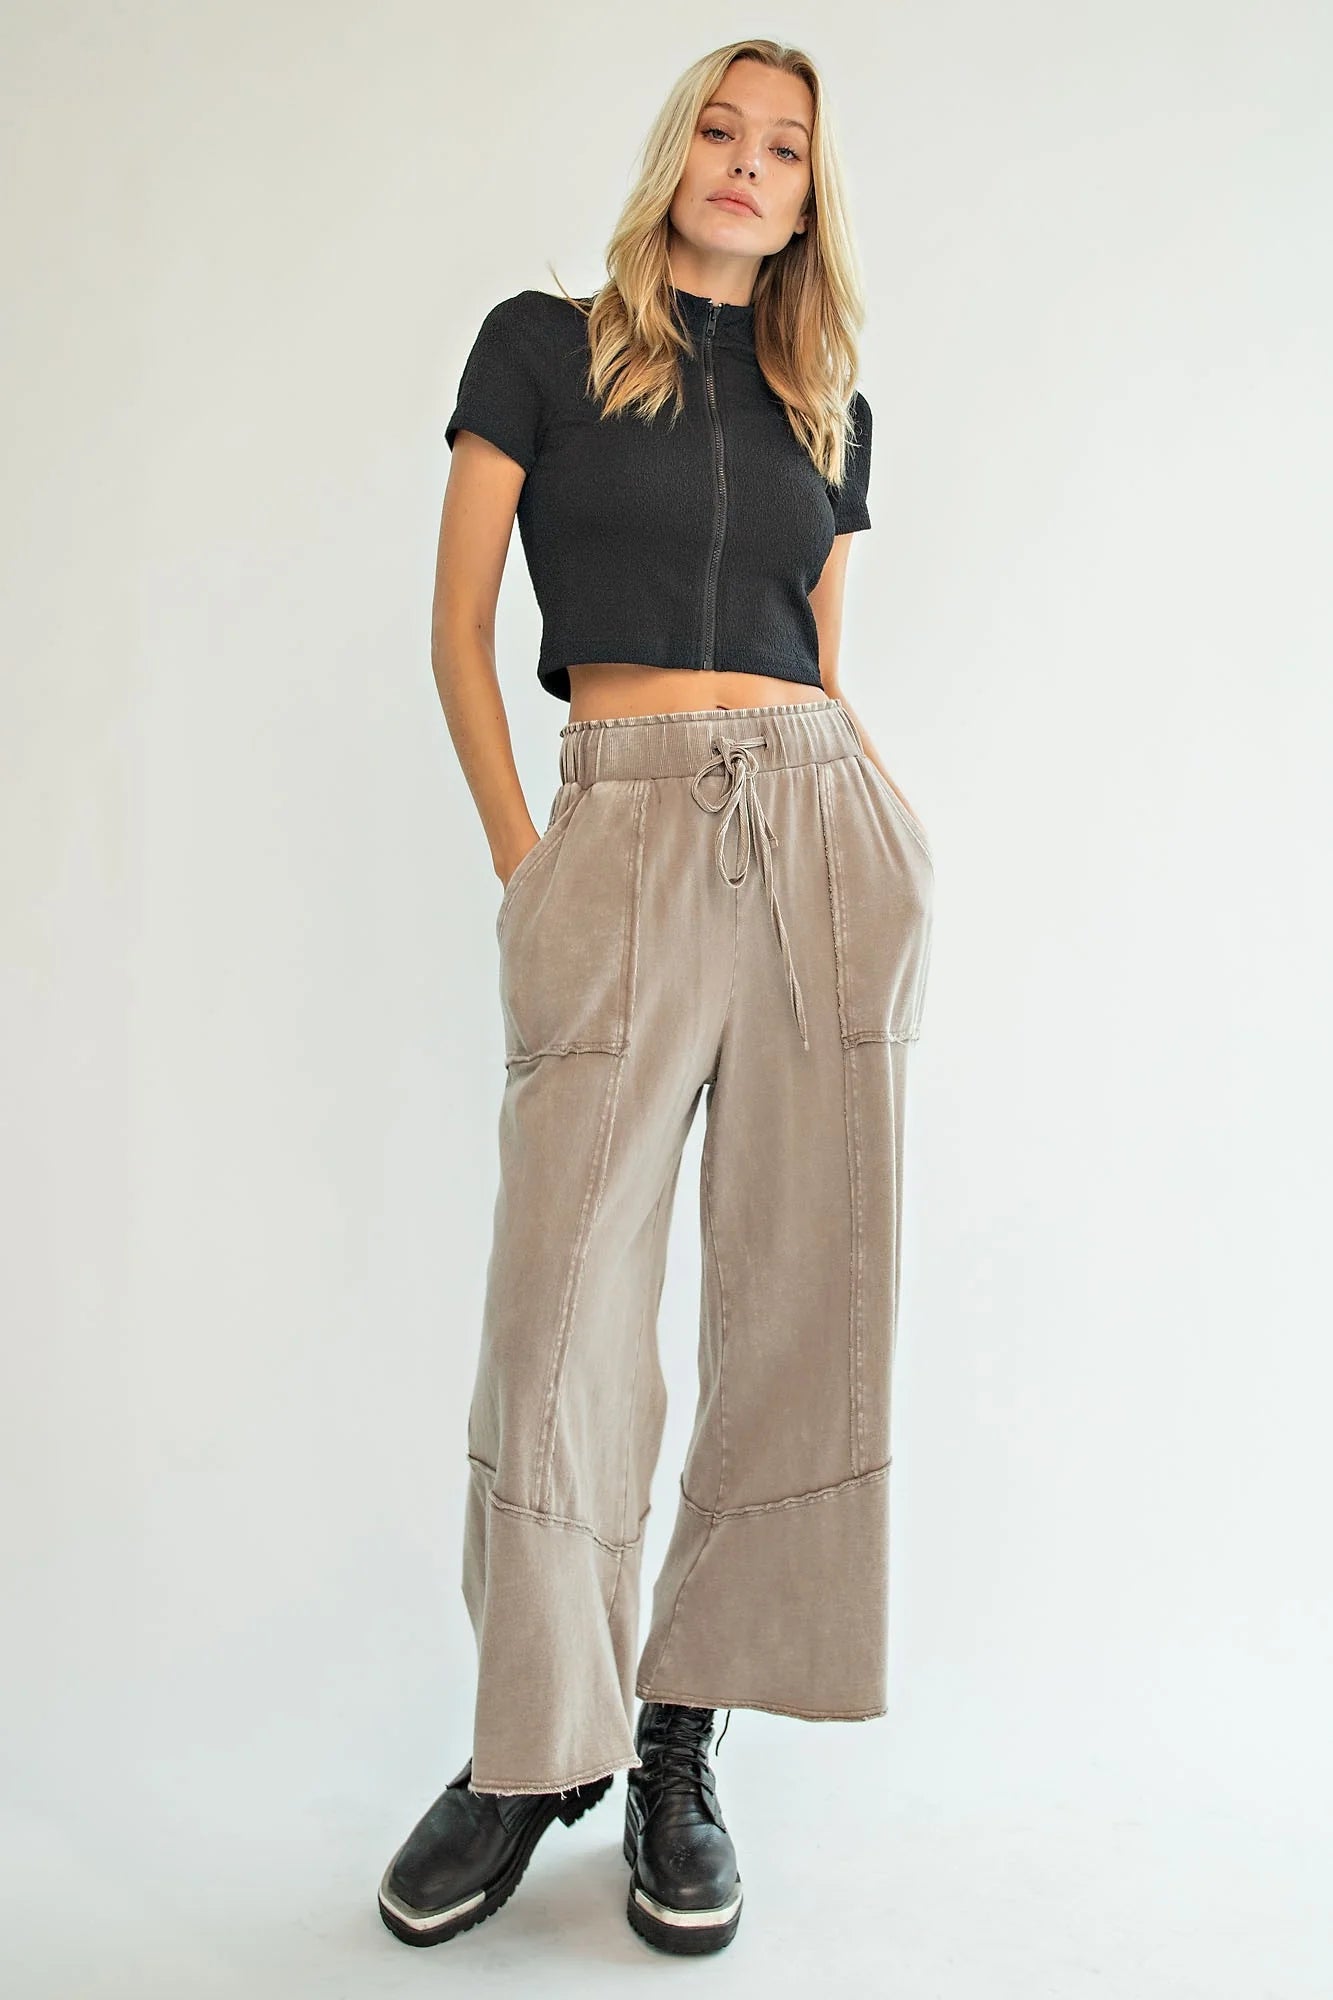 Chill Vibes Mineral Washed Terry Knit Wide Leg Pants in Mushroom